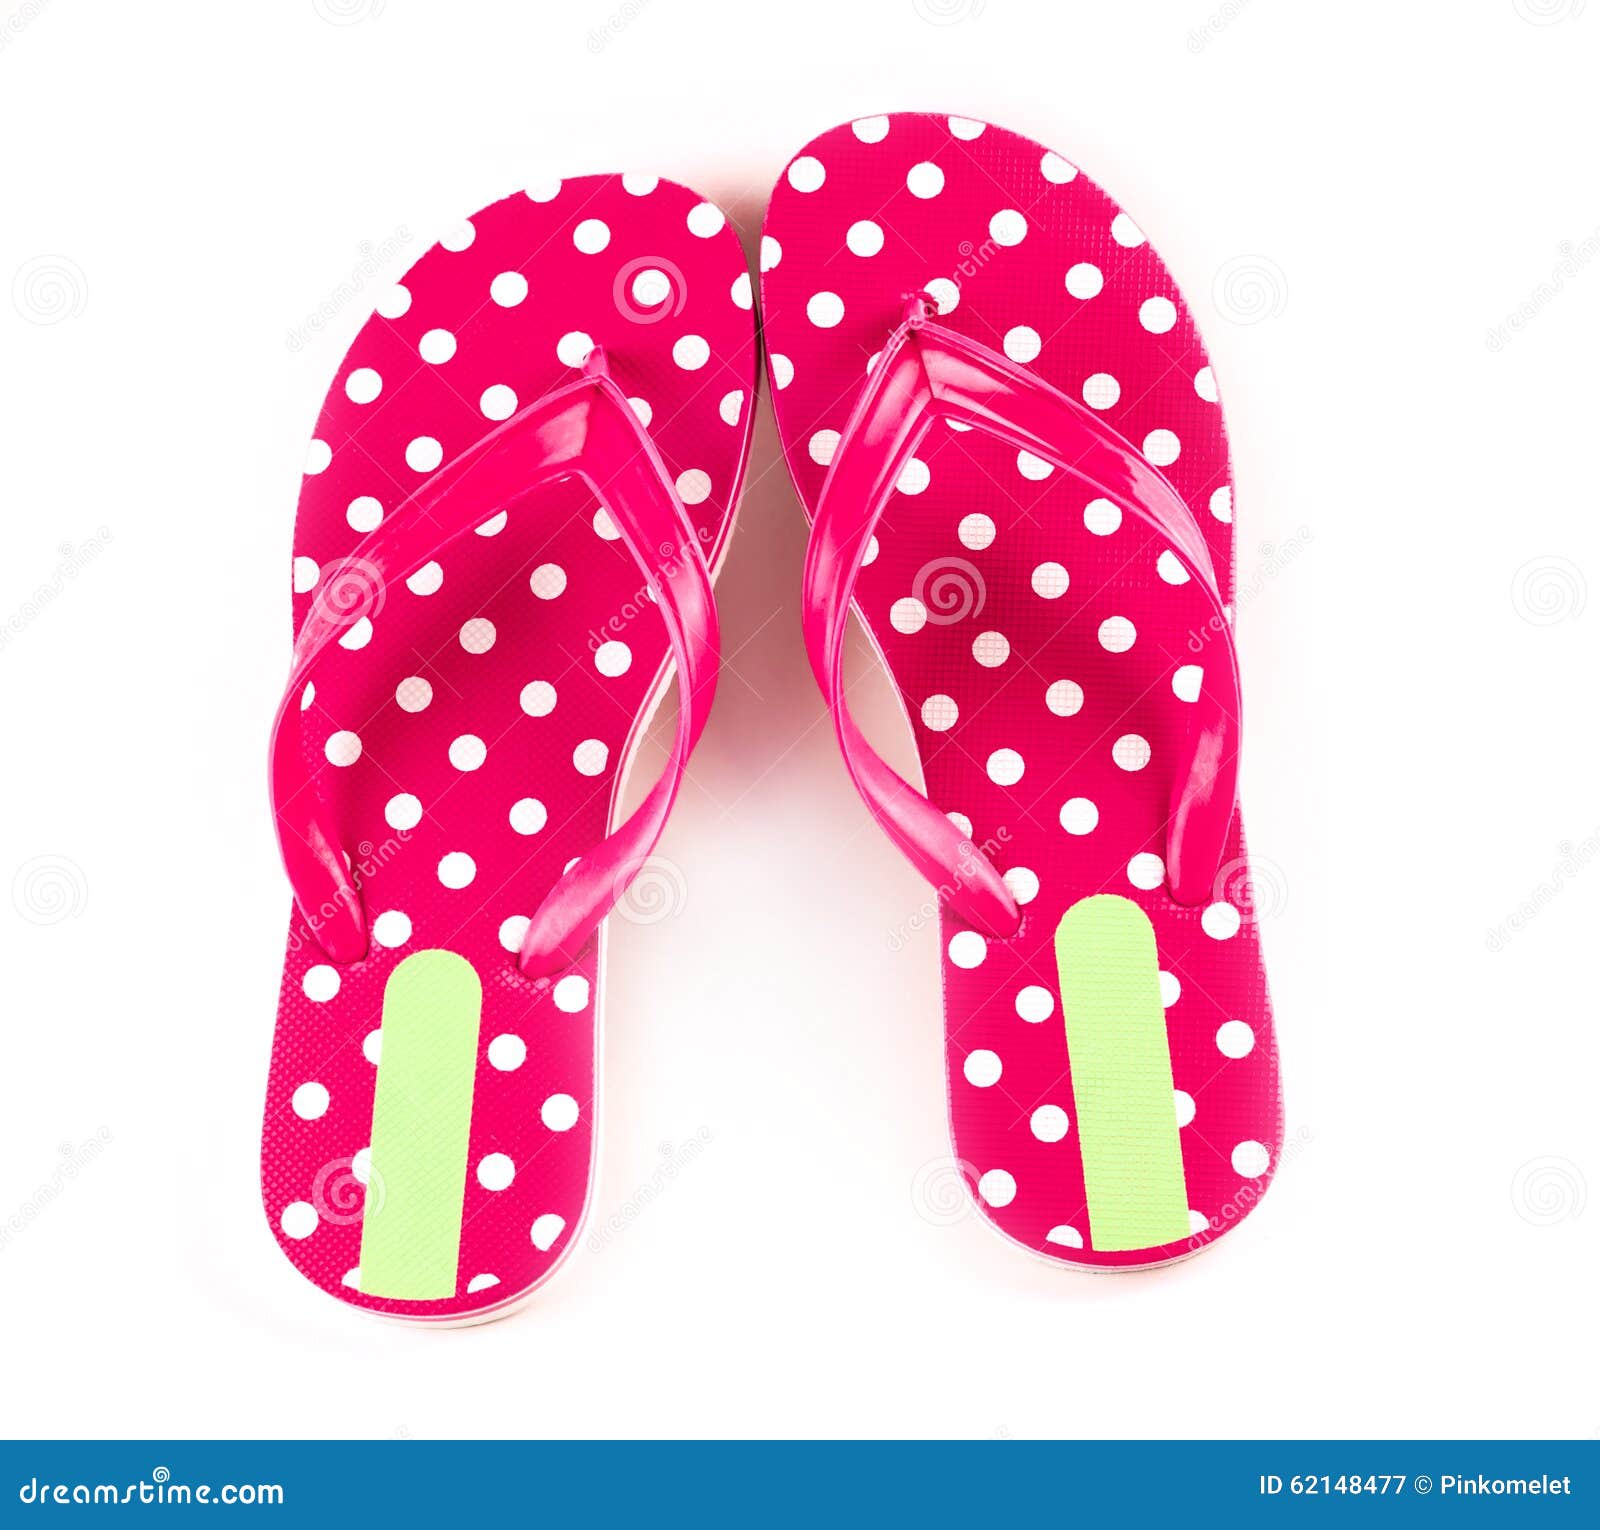 Summer Fashion Red Flip Flop Sandals on White Backgroun Stock Image ...